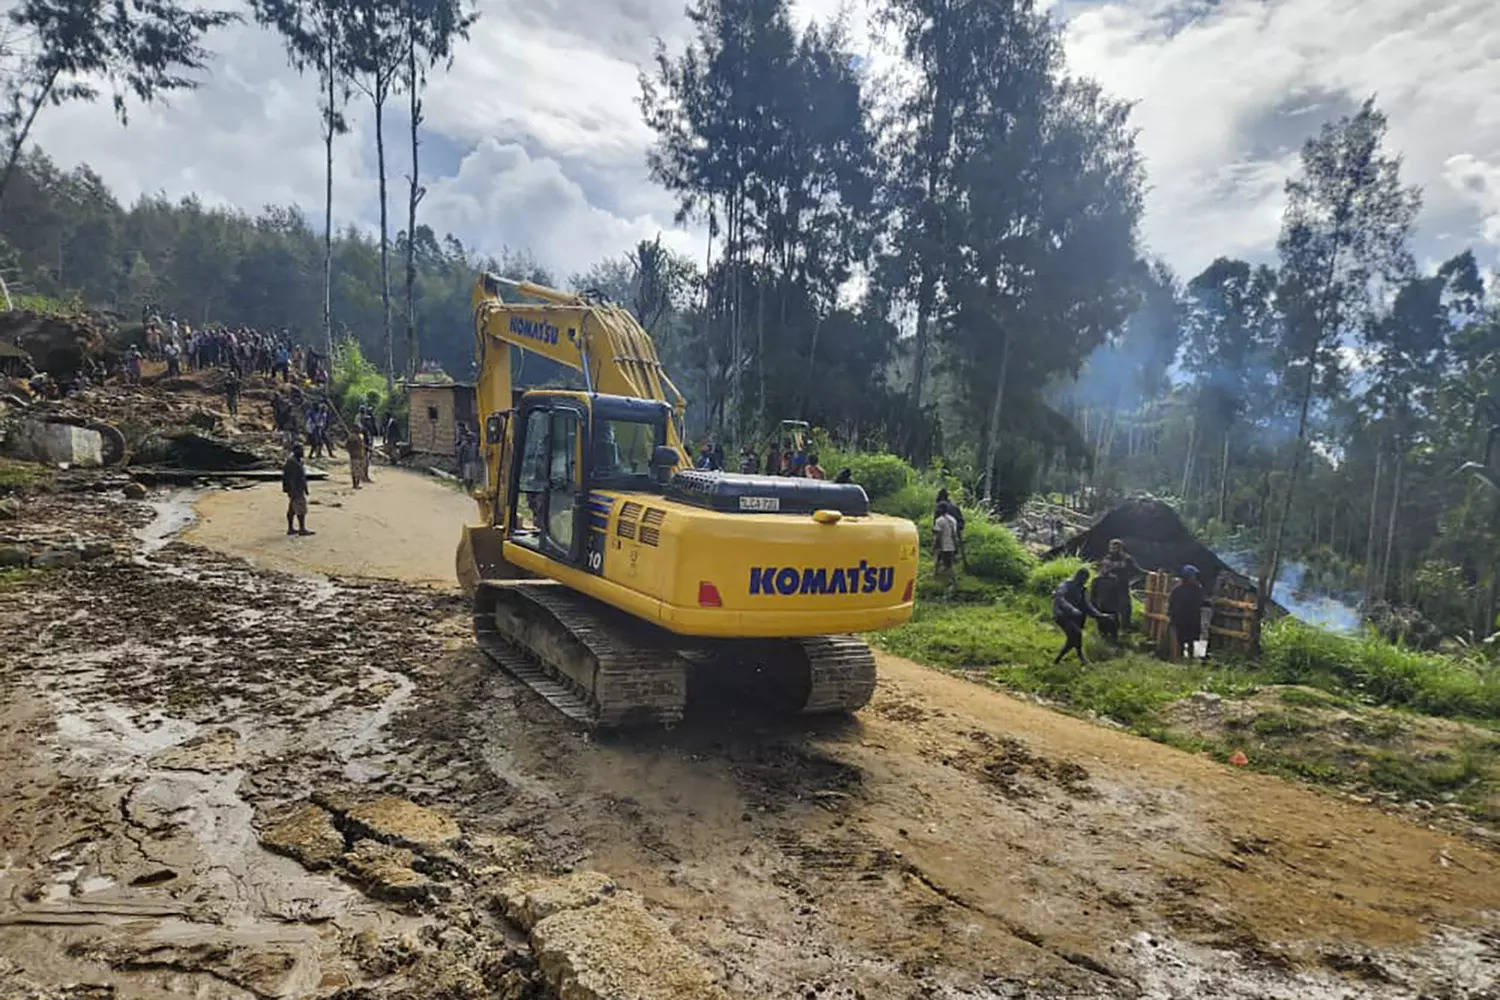 More than 670 feared dead in Papua New Guinea landslide, UN agency says 